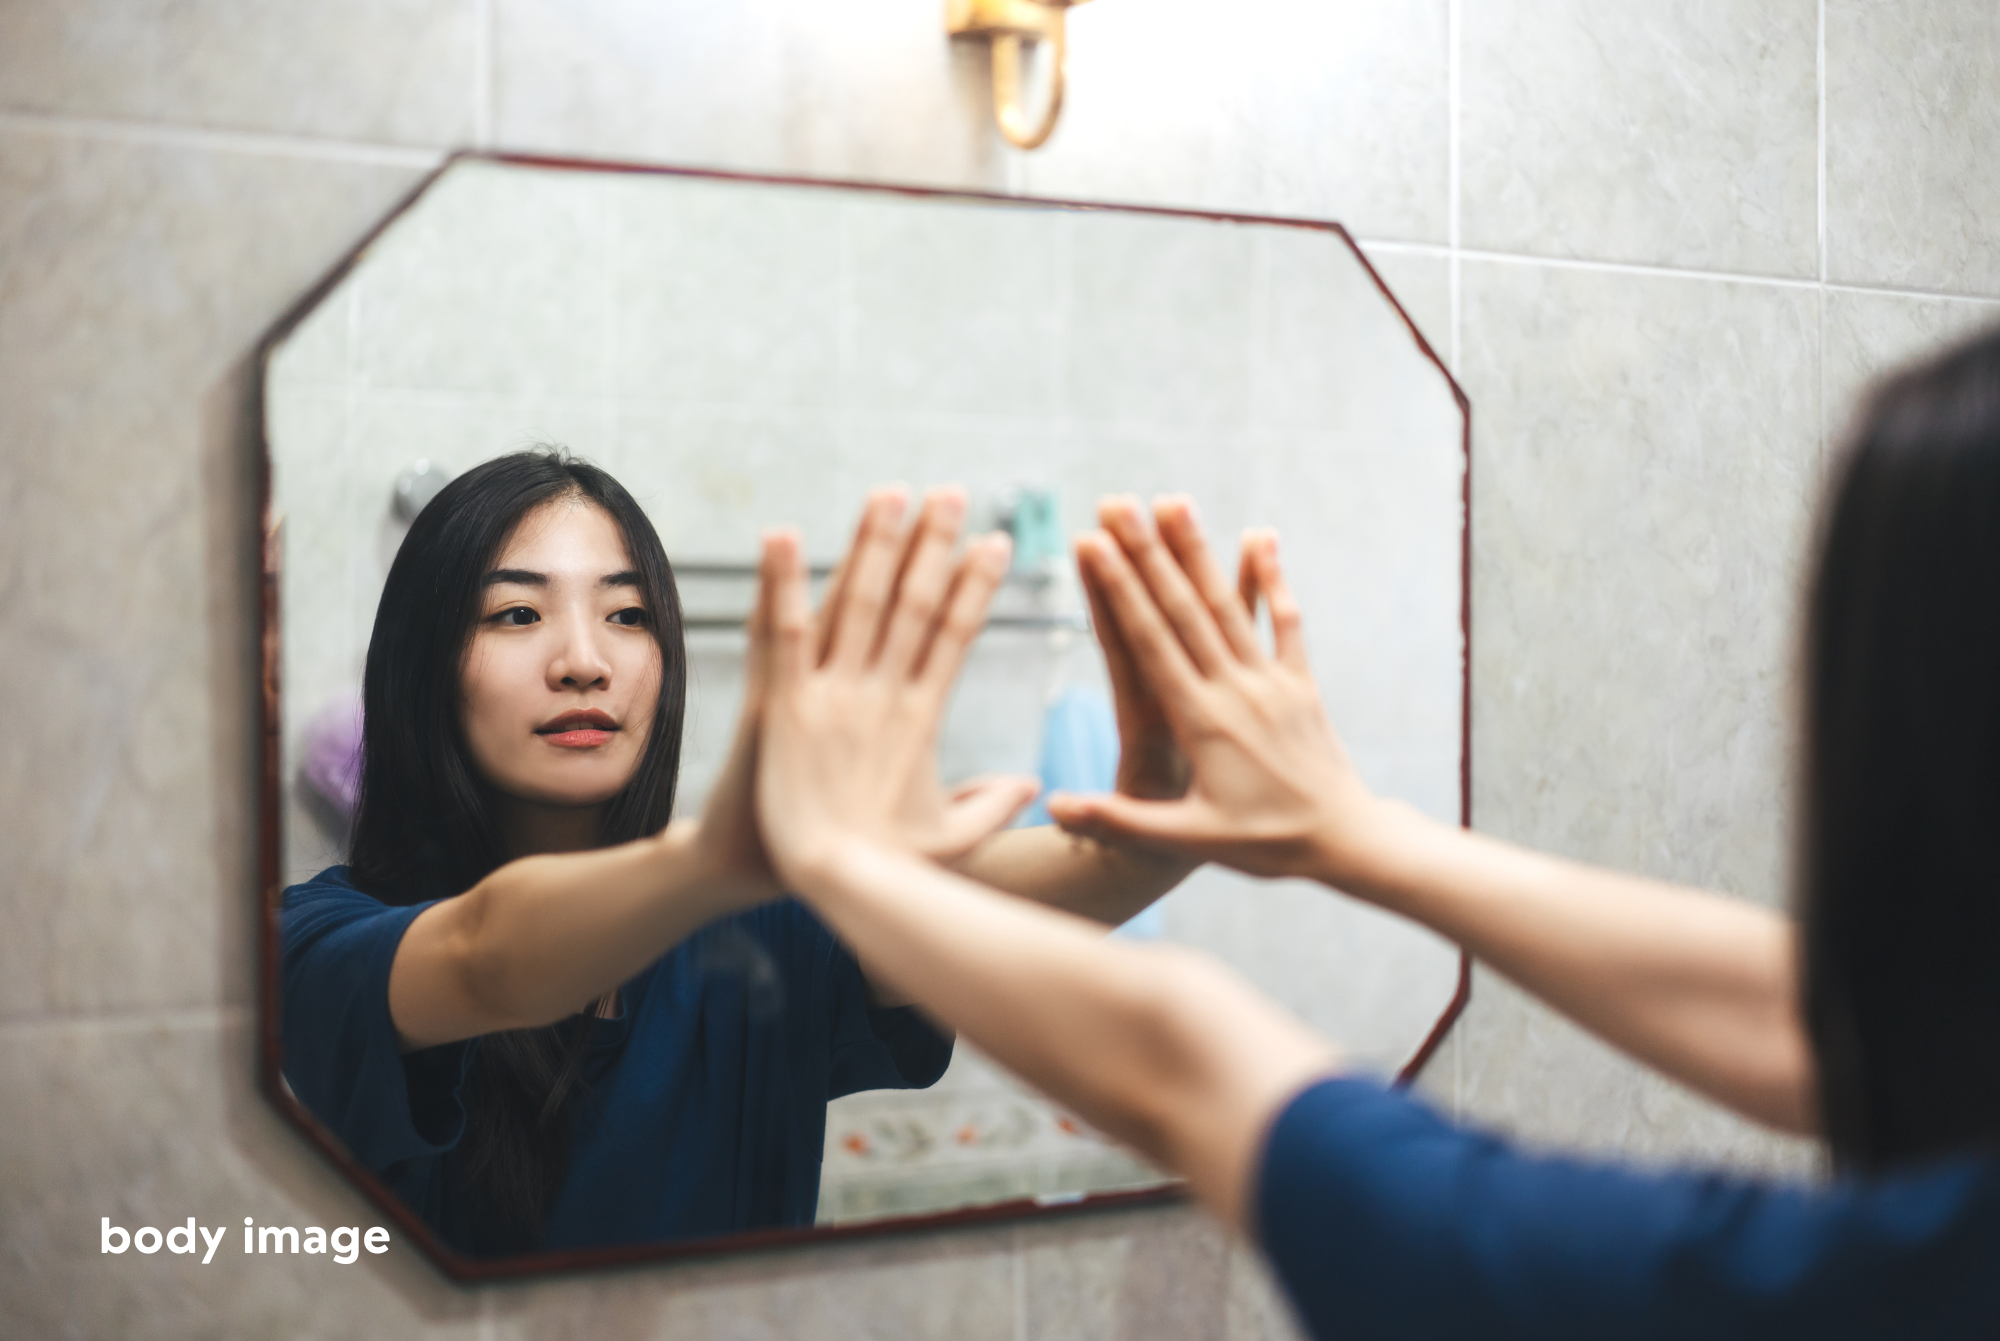 An asian girl with long black hair stands in front of a mirror pressing her hands up against it